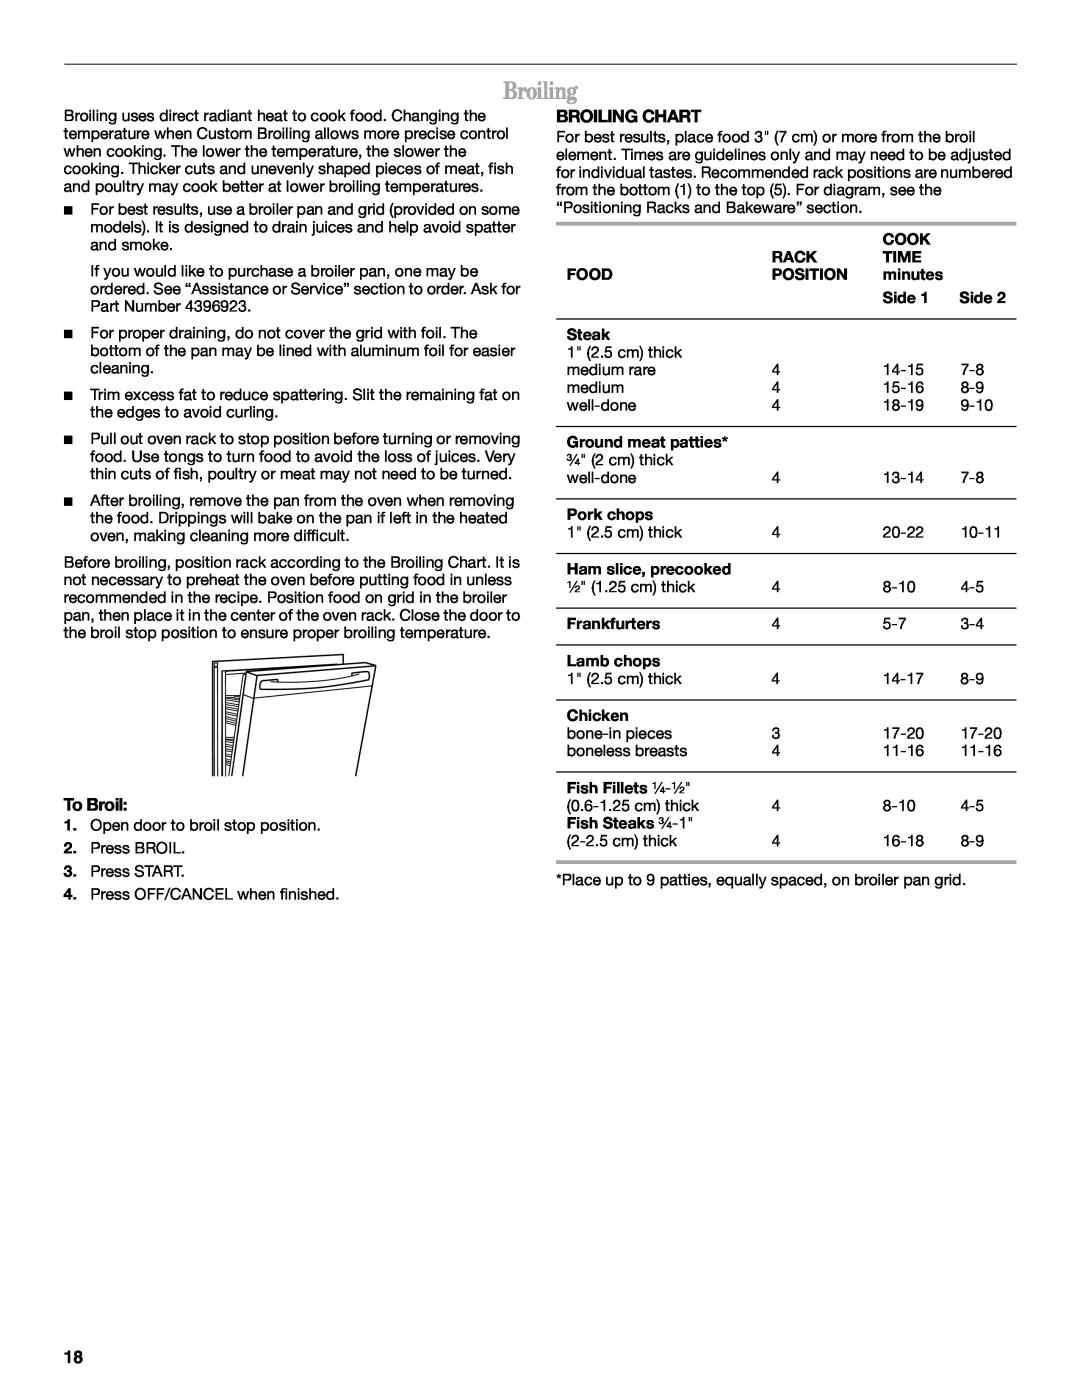 Whirlpool 9763001 manual To Broil, Broiling Chart 